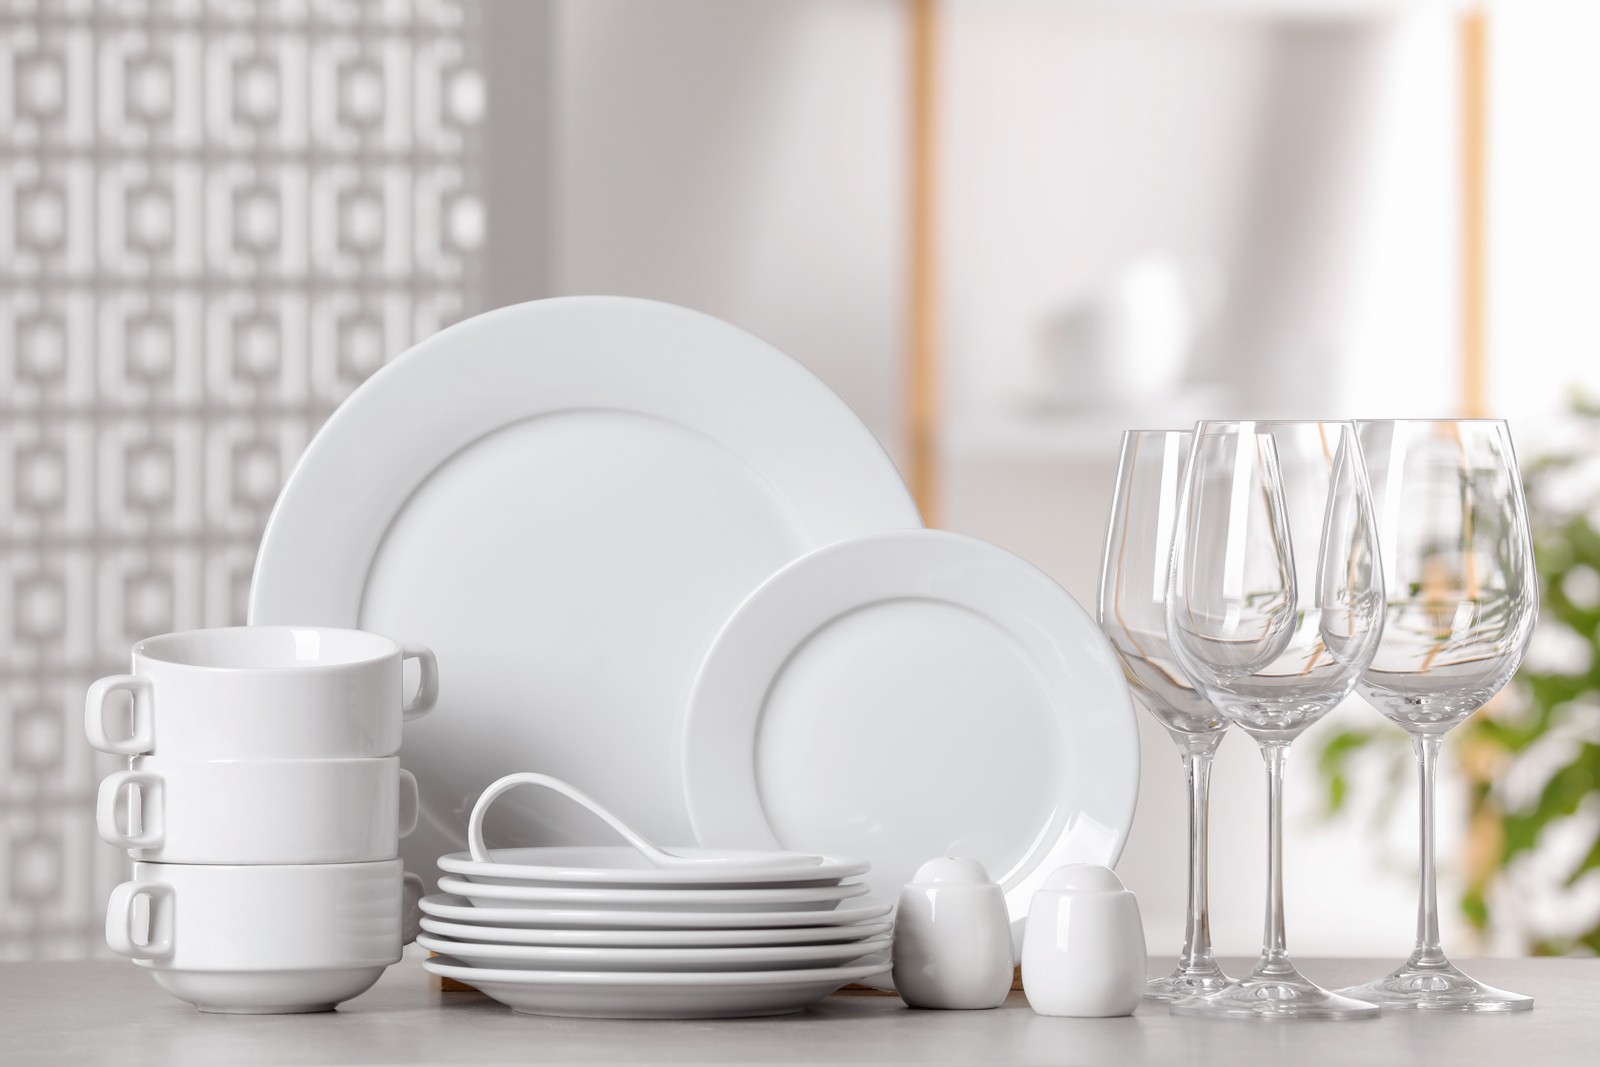 Photo of set of clean dishware and glasses on light grey table